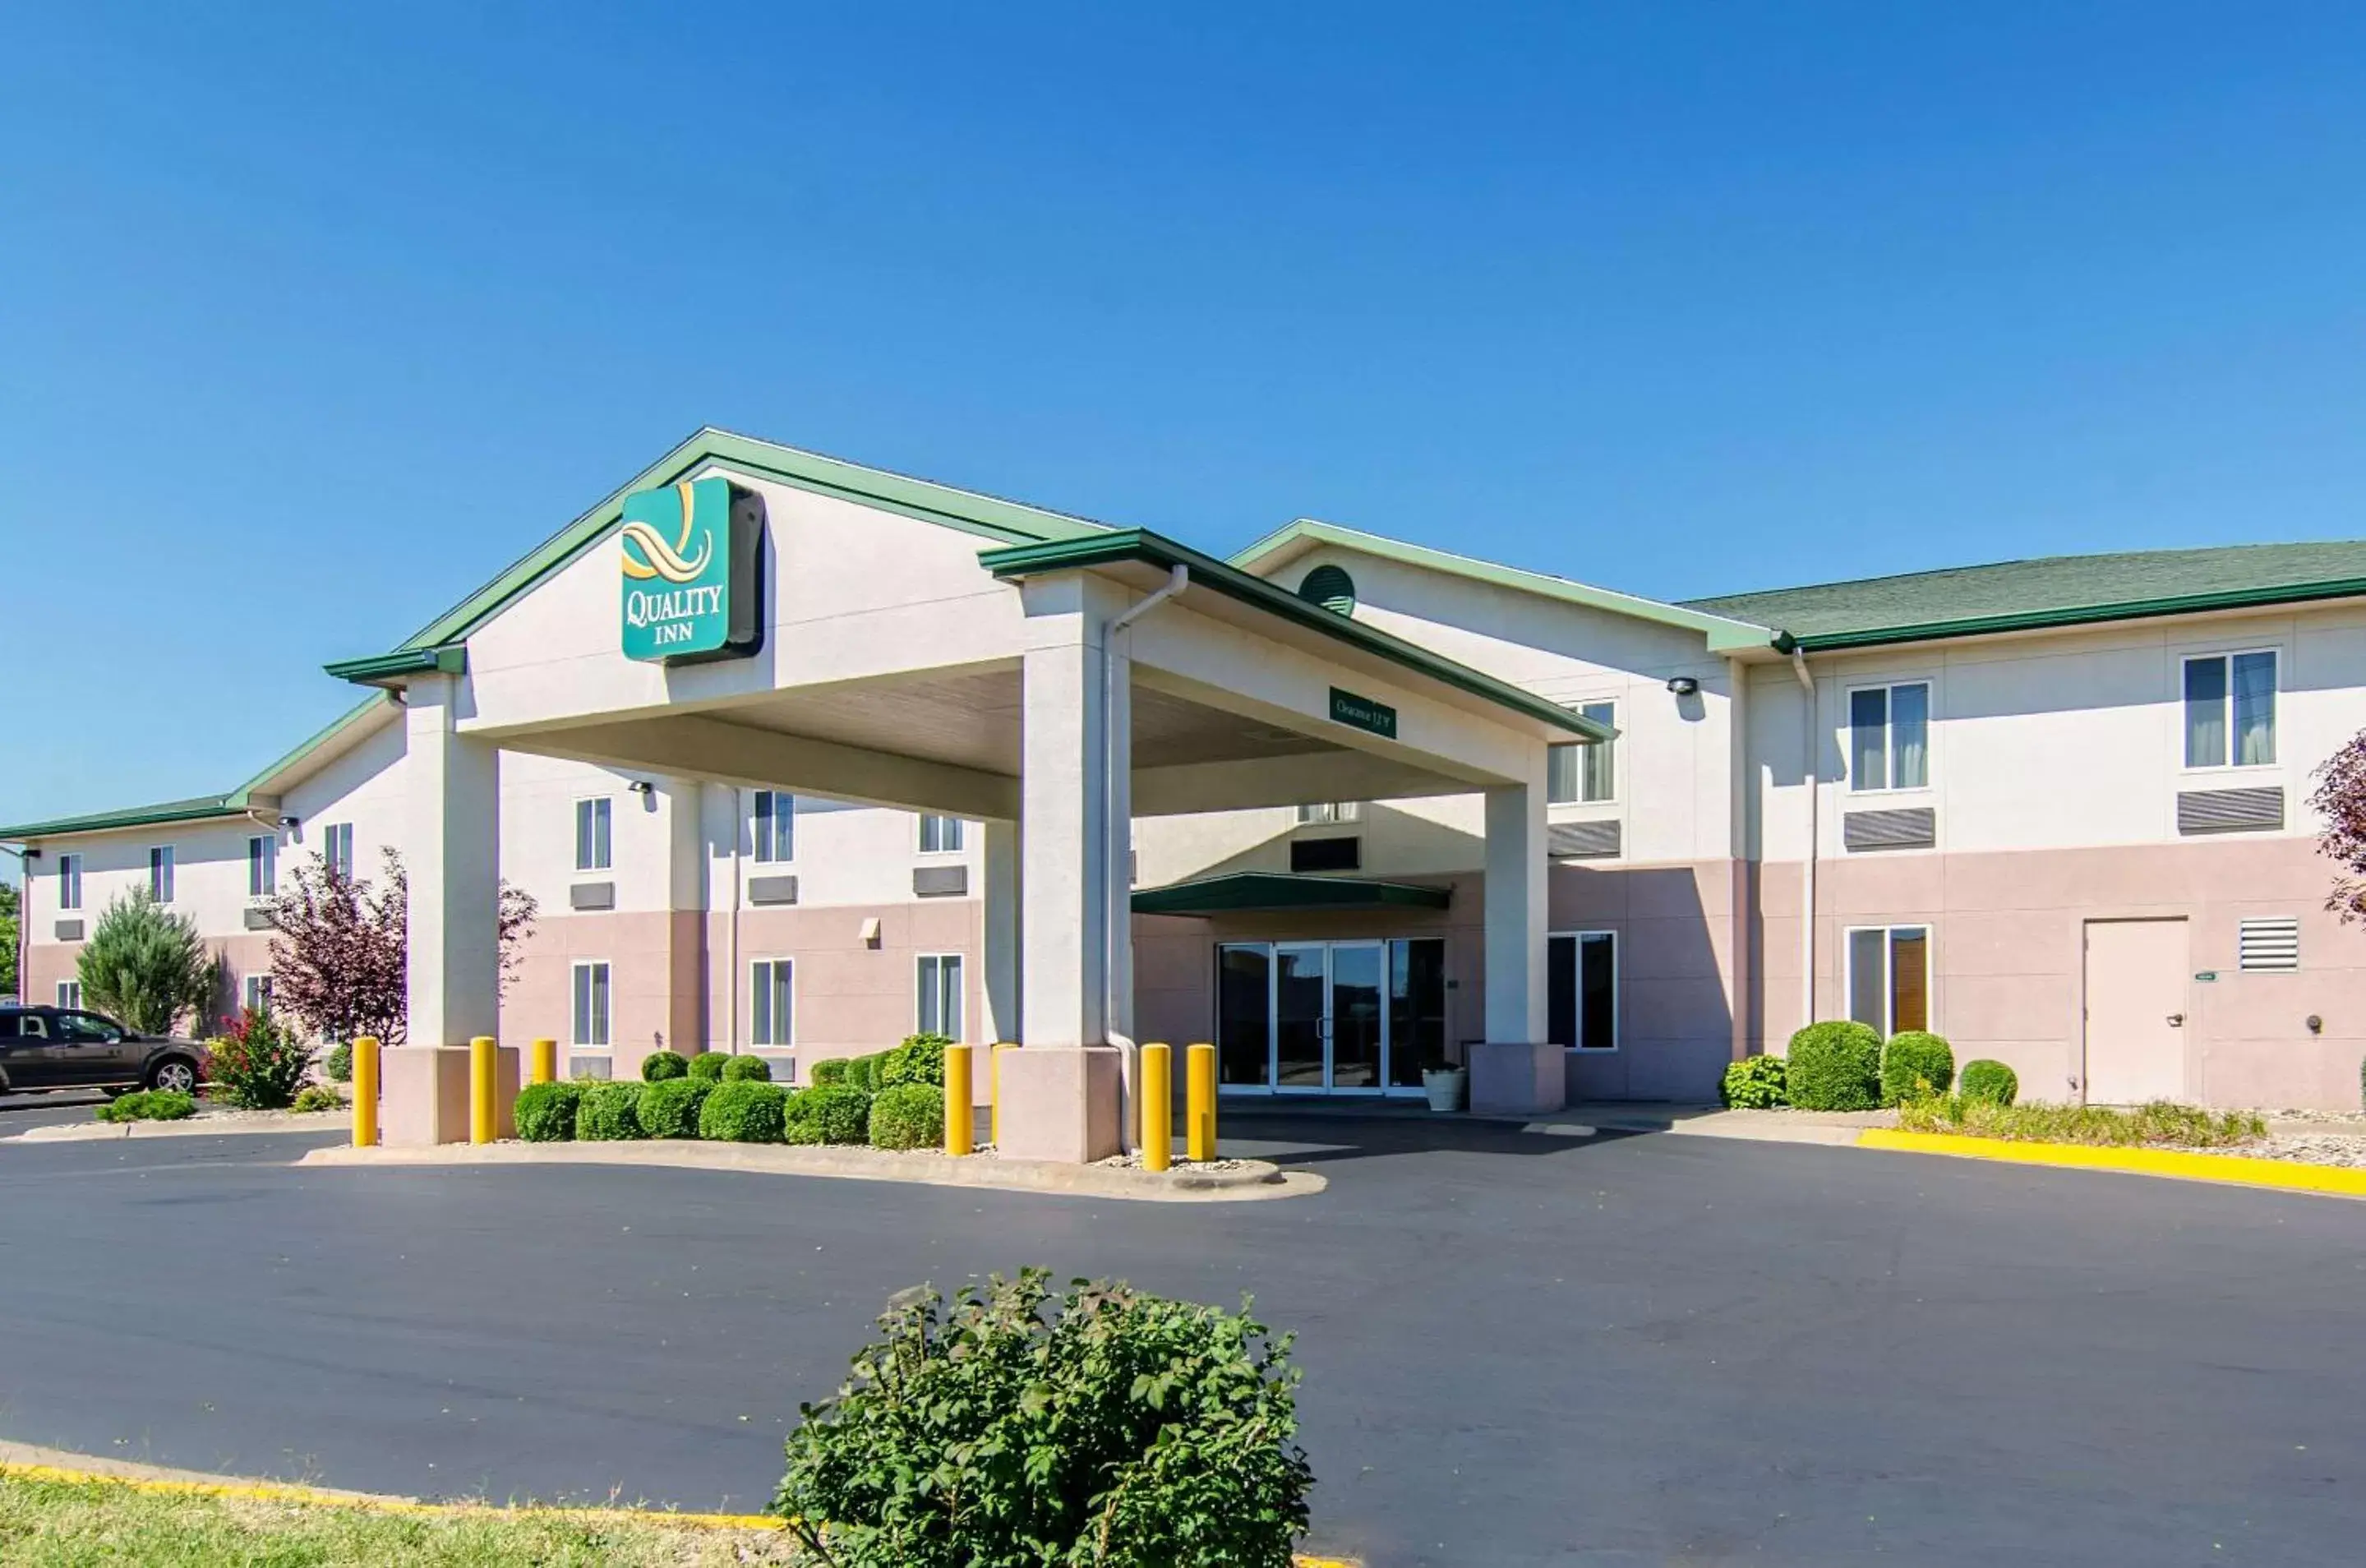 Property Building in Quality Inn Junction City near Fort Riley